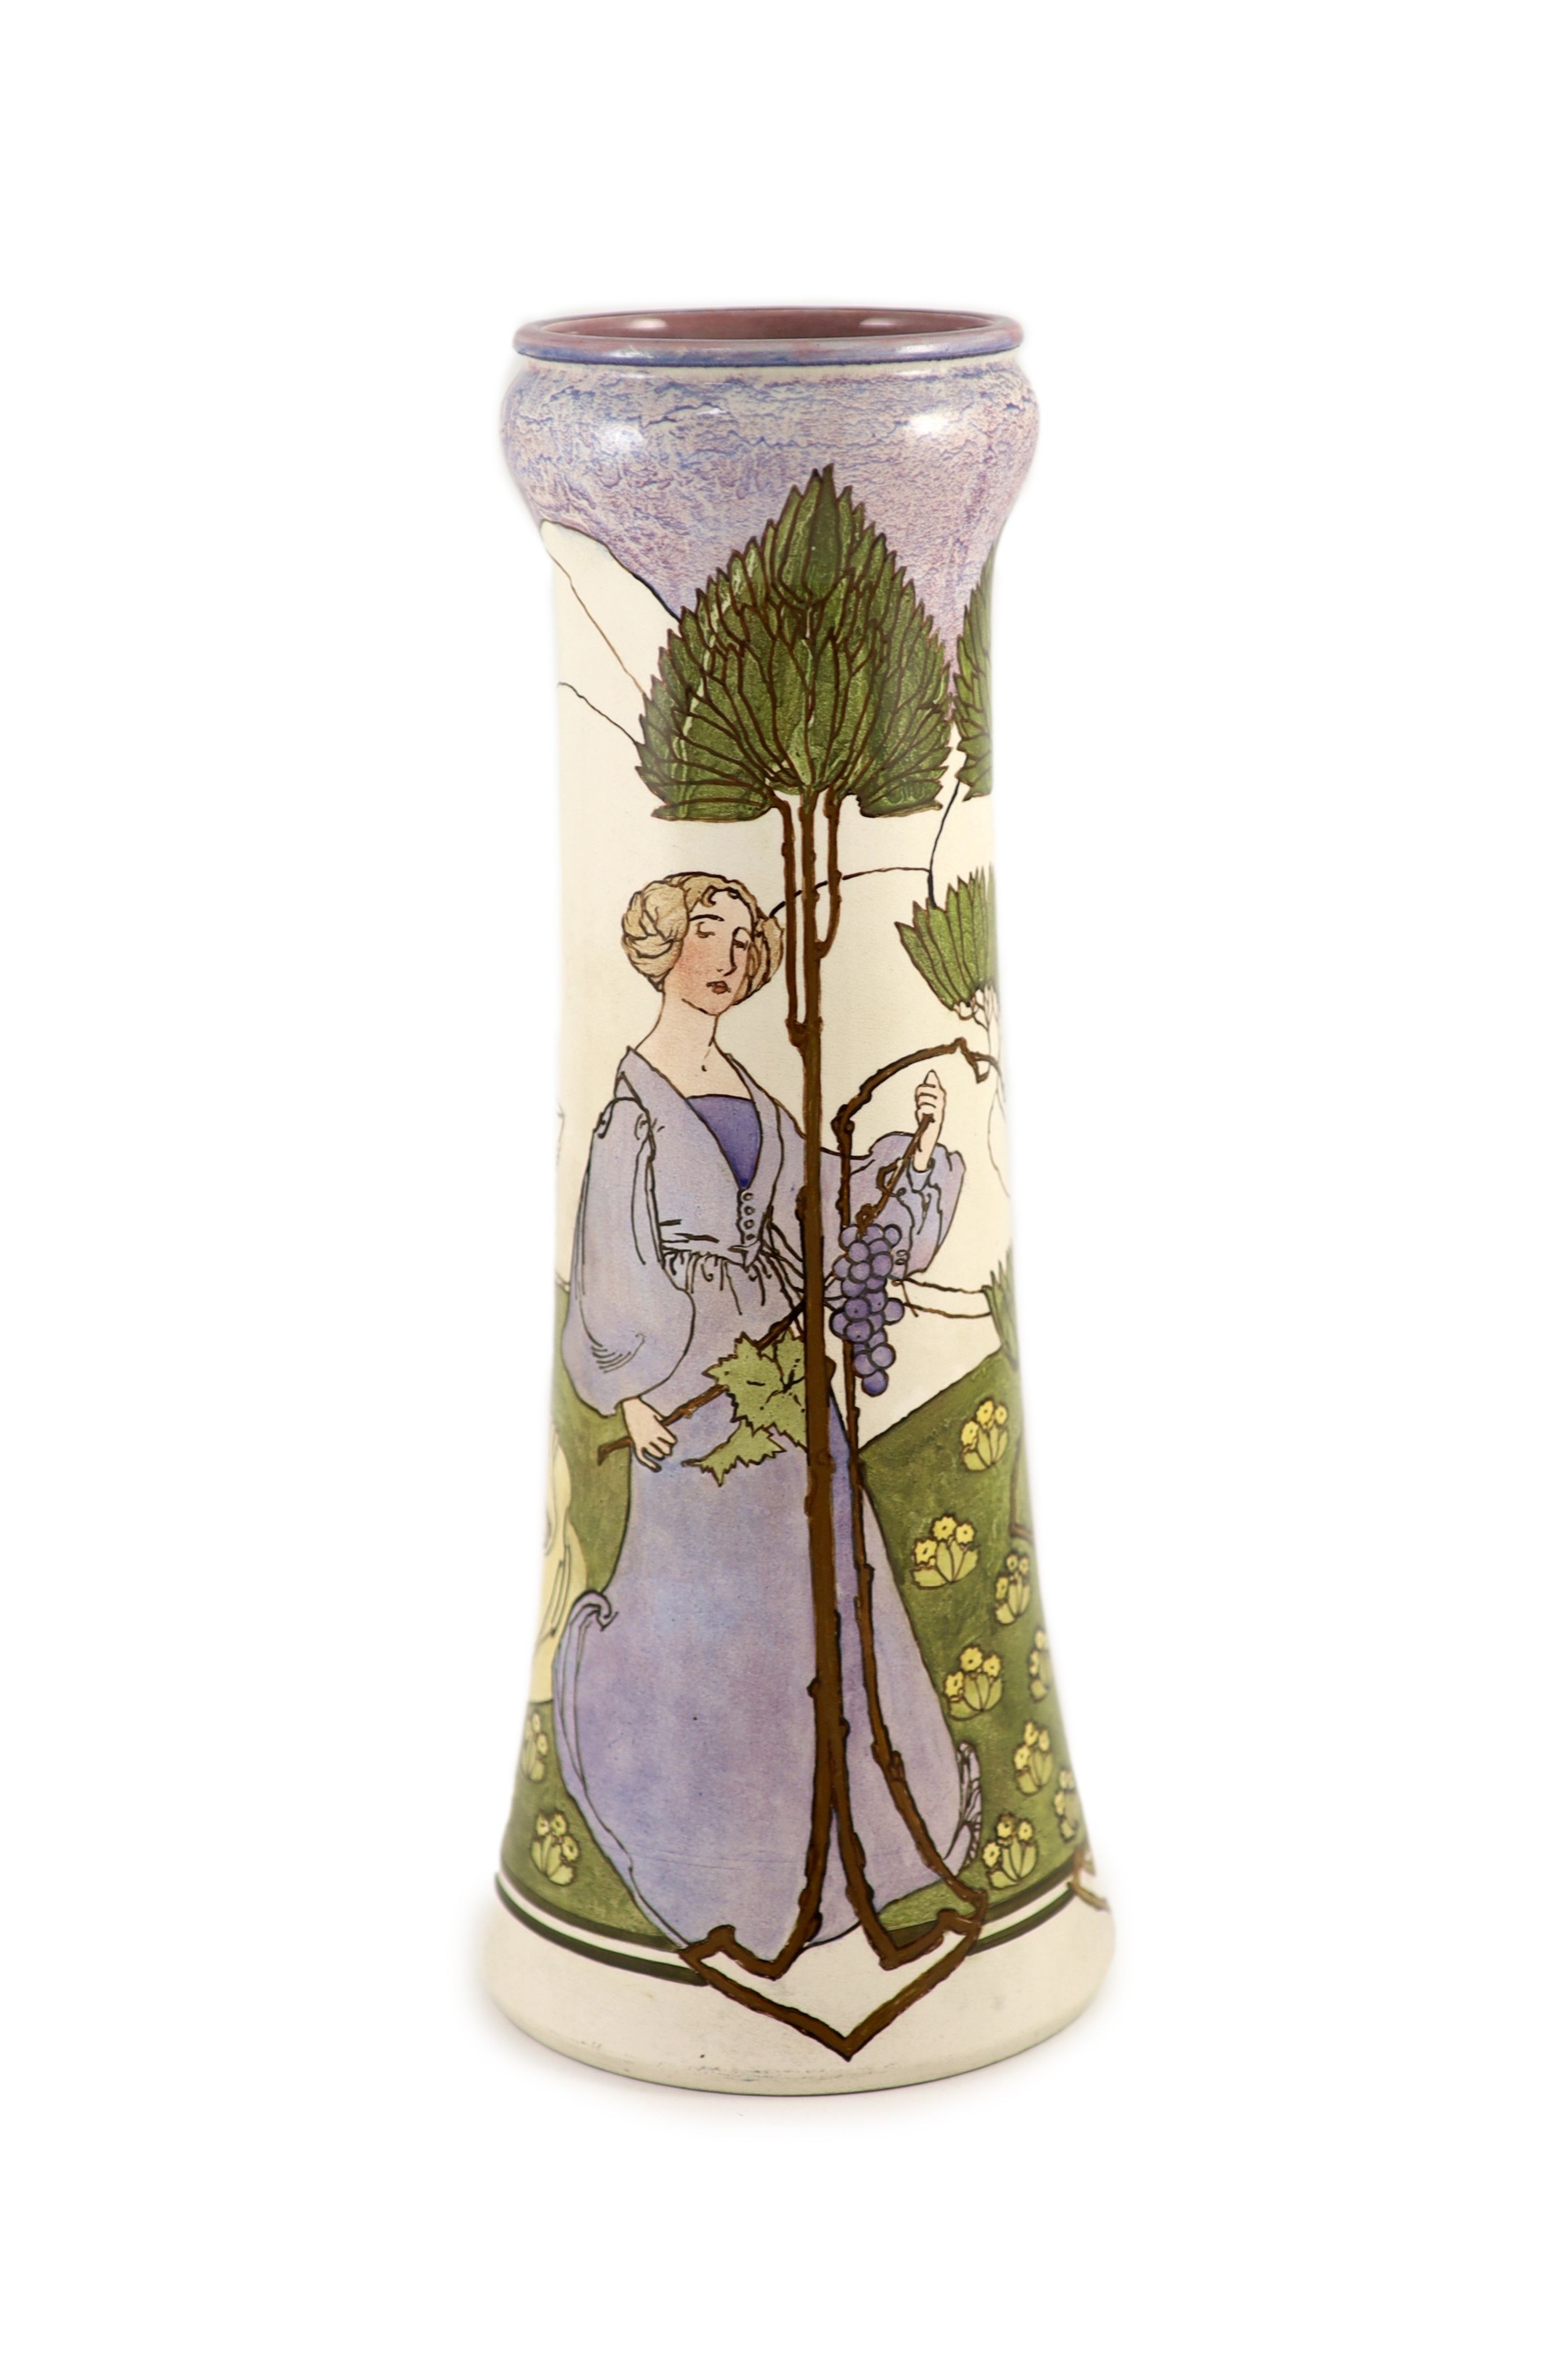 Margaret Thompson for Doulton, Lambeth - an Art Nouveau tall faience vase, c.1900,painted with two